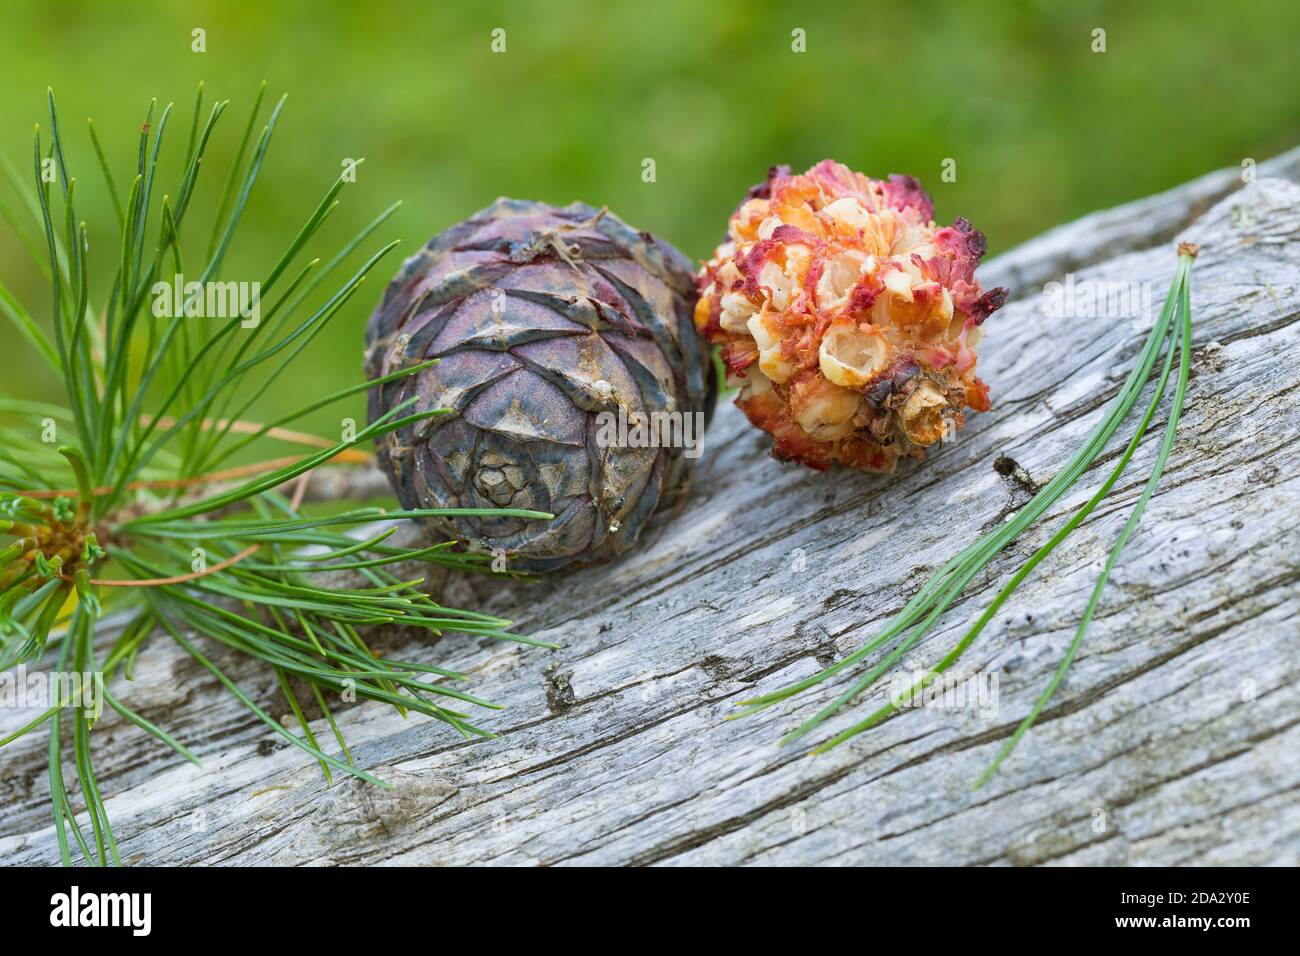 spotted nutcracker (Nucifraga caryocatactes), Swiss pine cones, the right one pecked by a nutcracker, Germany Stock Photo